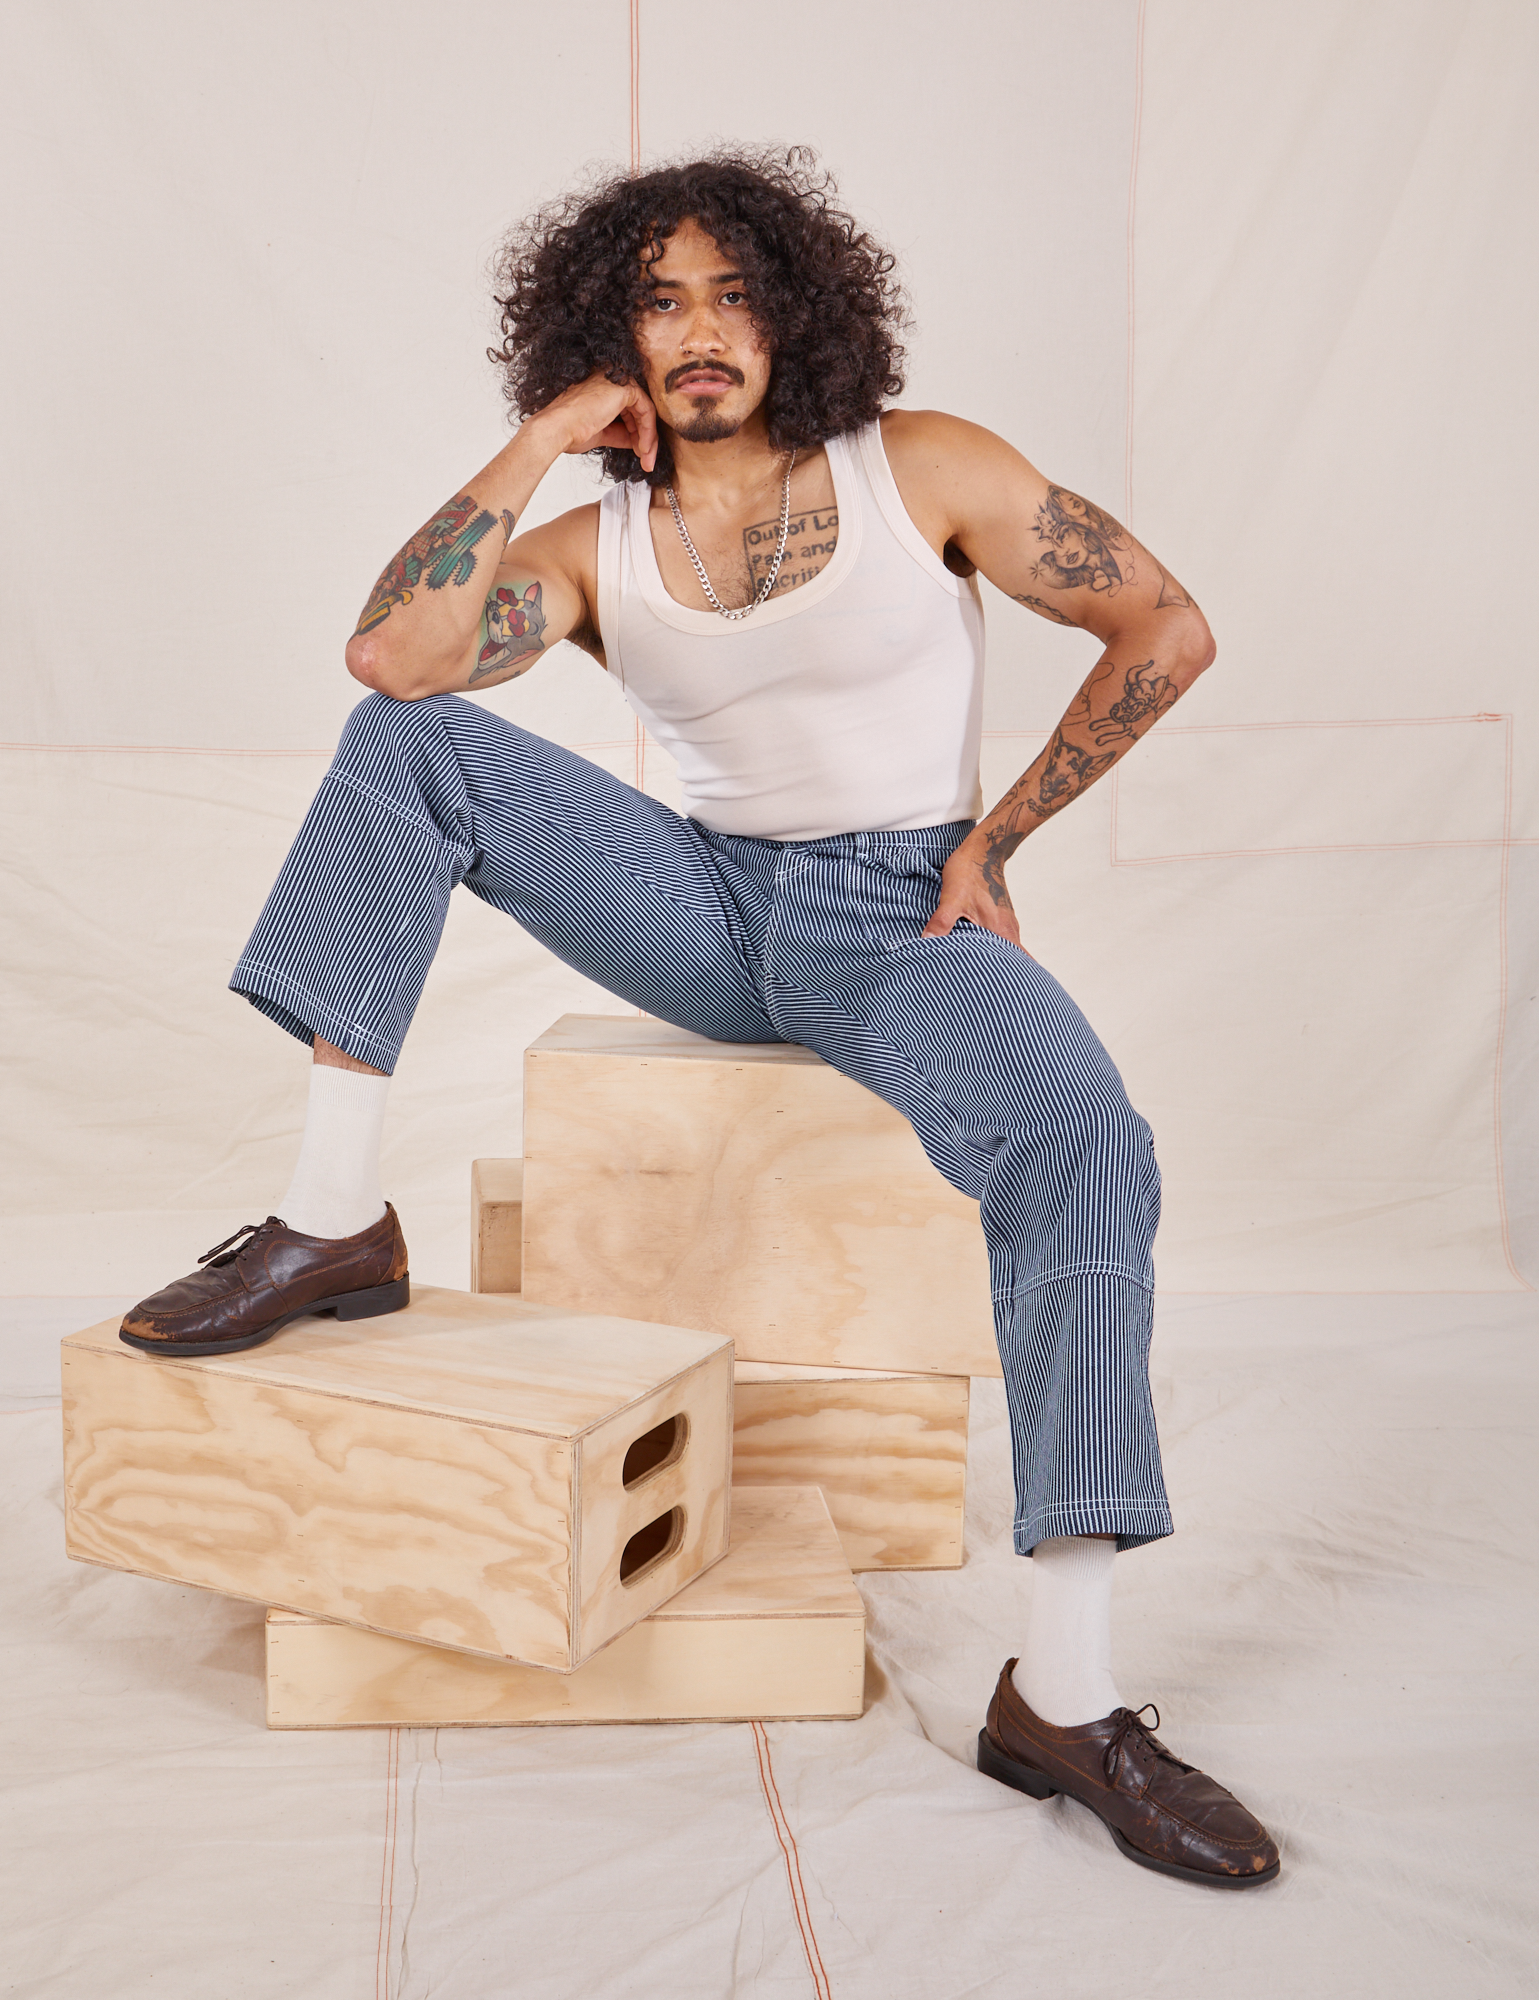 Jesse is sitting on a stack of wooden crates. They are wearing Carpenter Jeans in Railroad Stripes and Tank Top in vintage tee off-white